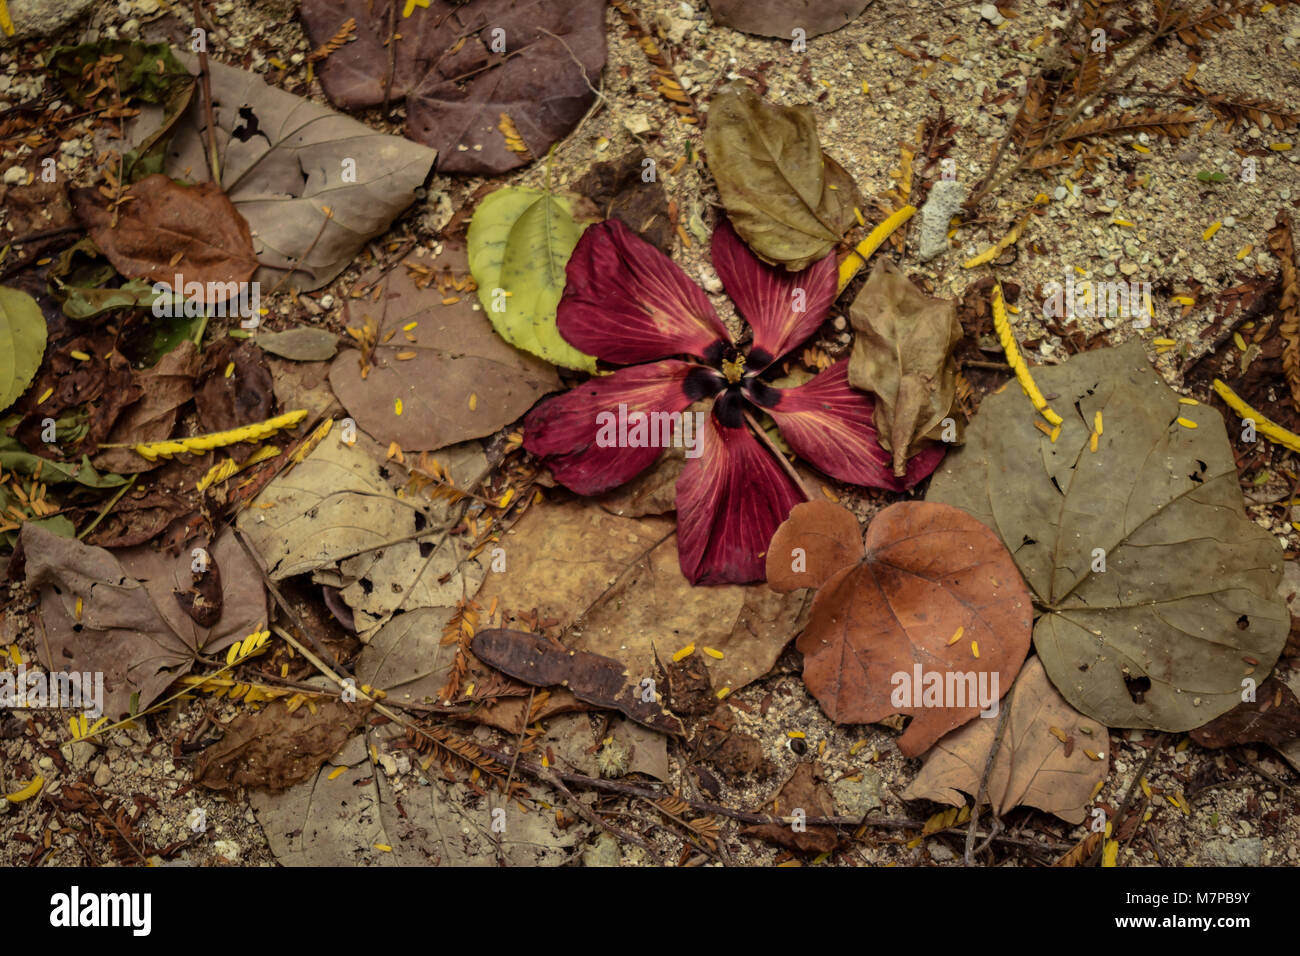 An old hibiscus flower fallen on the floor among the leaf litter by the beach Stock Photo